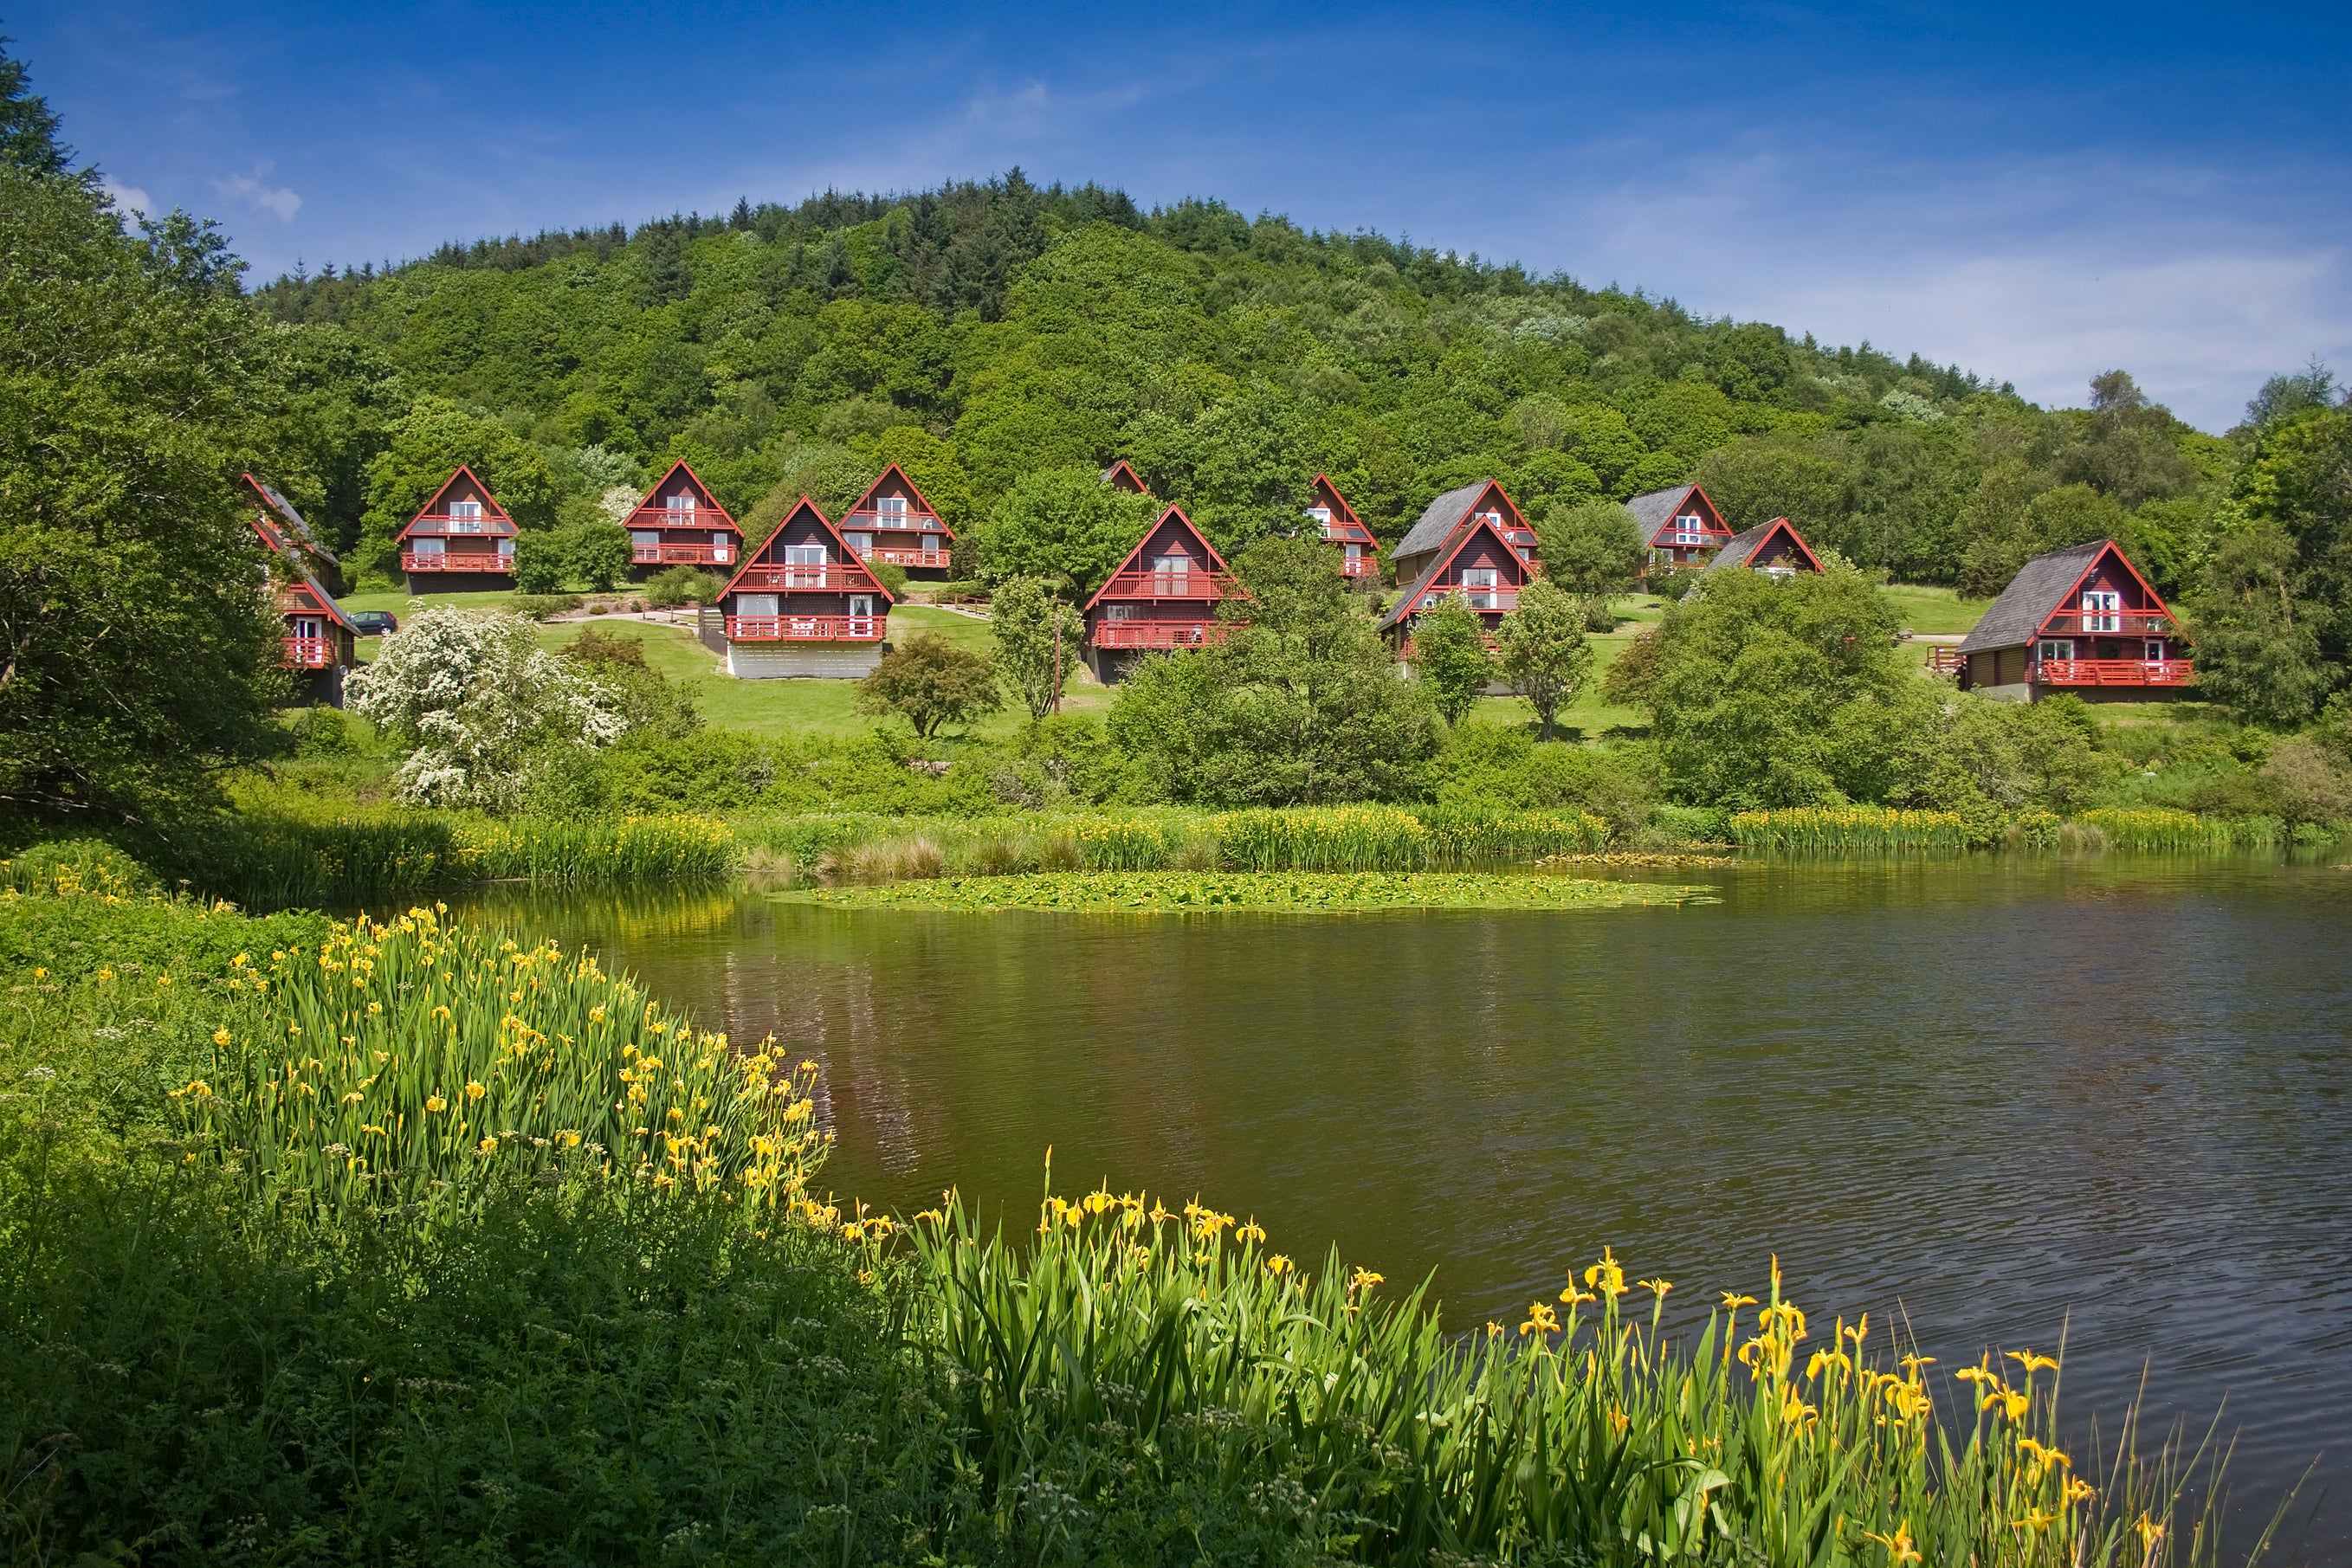 Enjoy the breathtaking view of Barend Loch from the Barend Holiday Village lodges